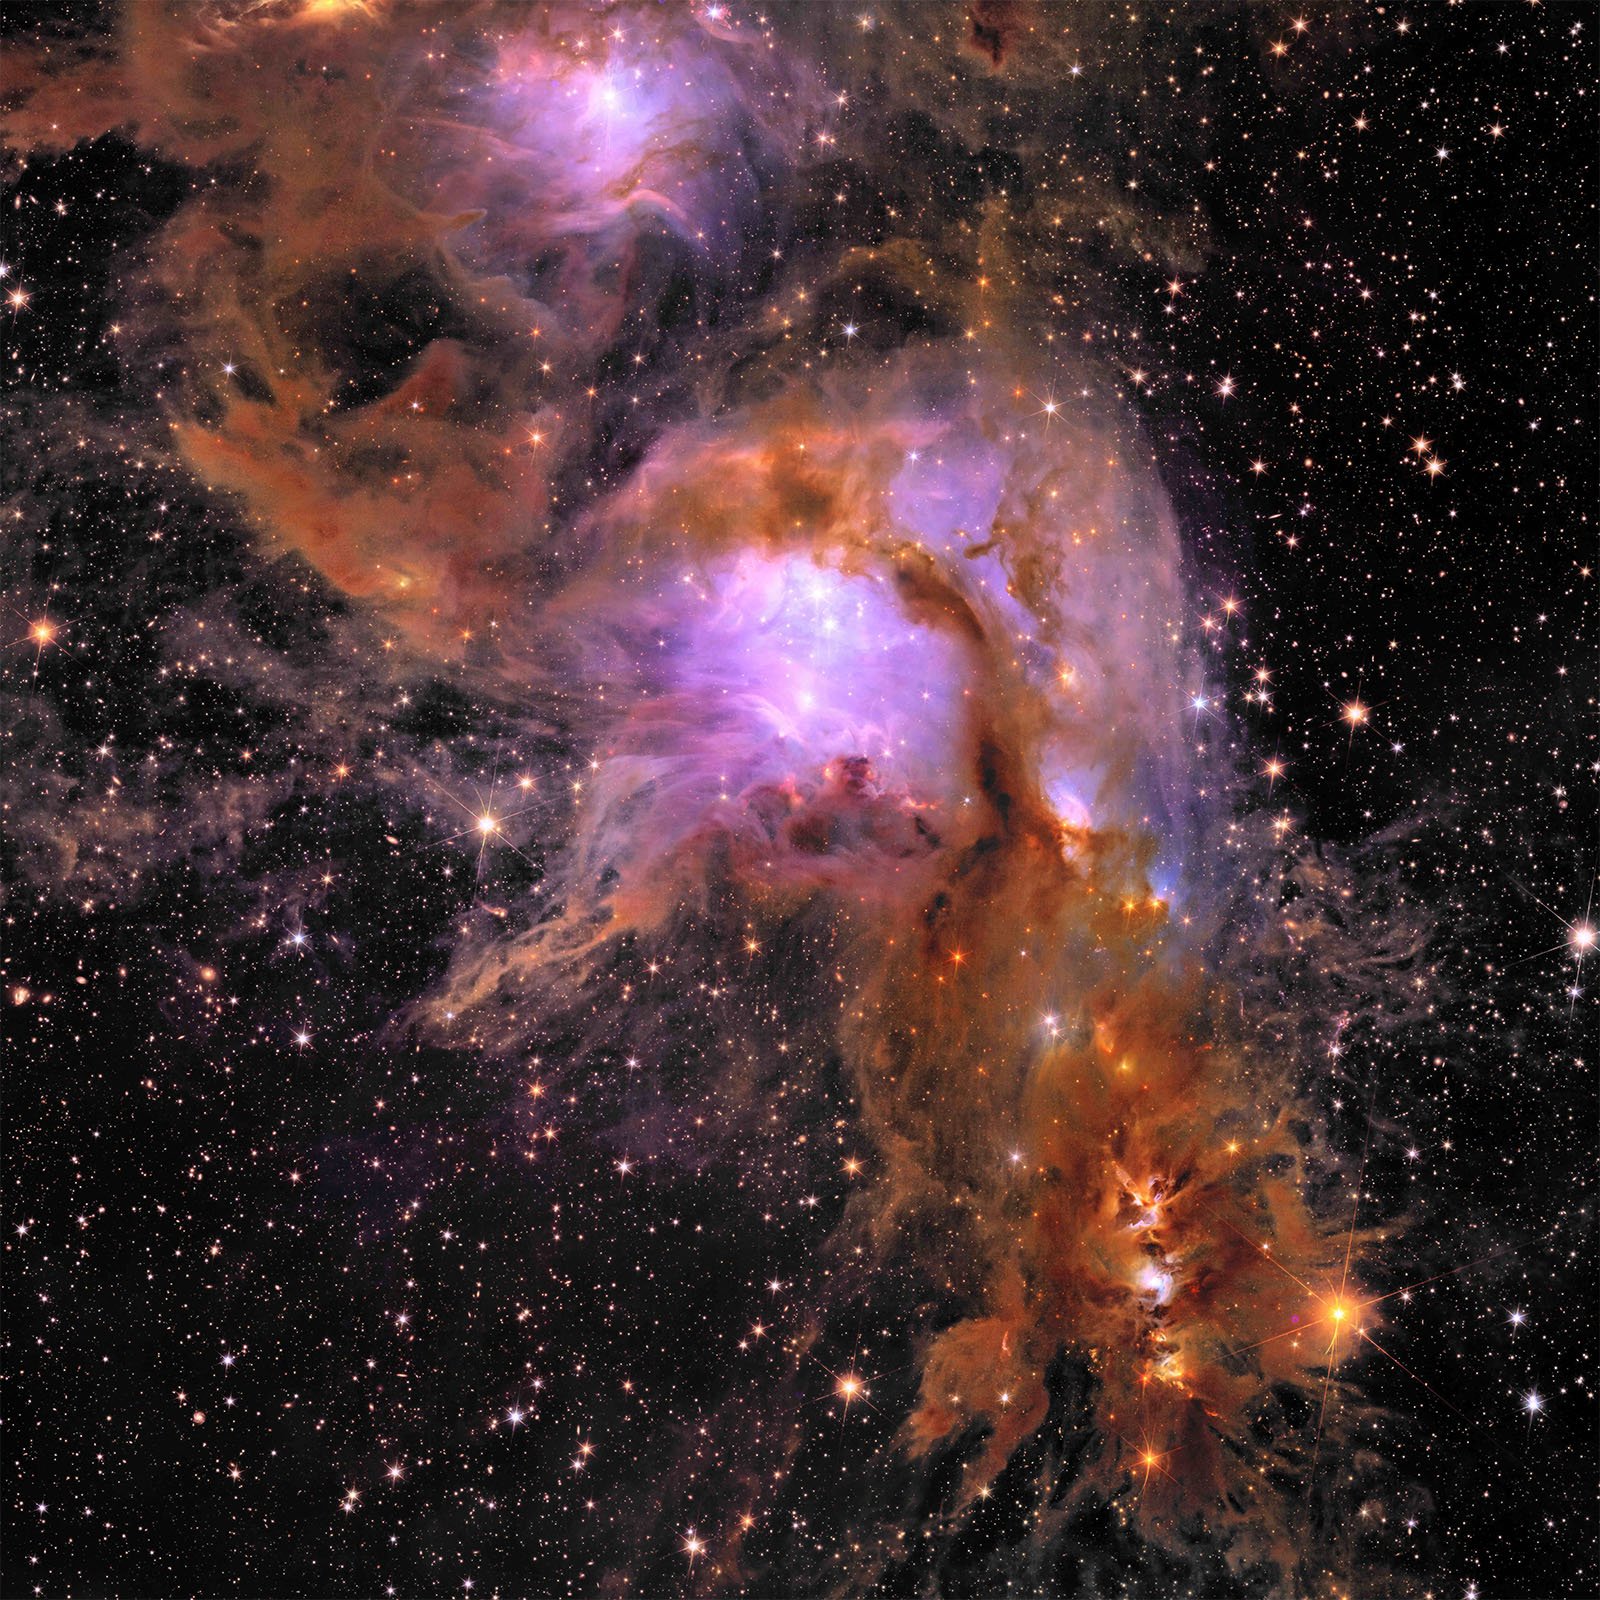 A vibrant cosmic scene featuring the Monkey Head Nebula, with swirling clouds of pink, purple, and orange gas and dust. Numerous stars are scattered throughout the black background, shining brightly against the colorful nebula.